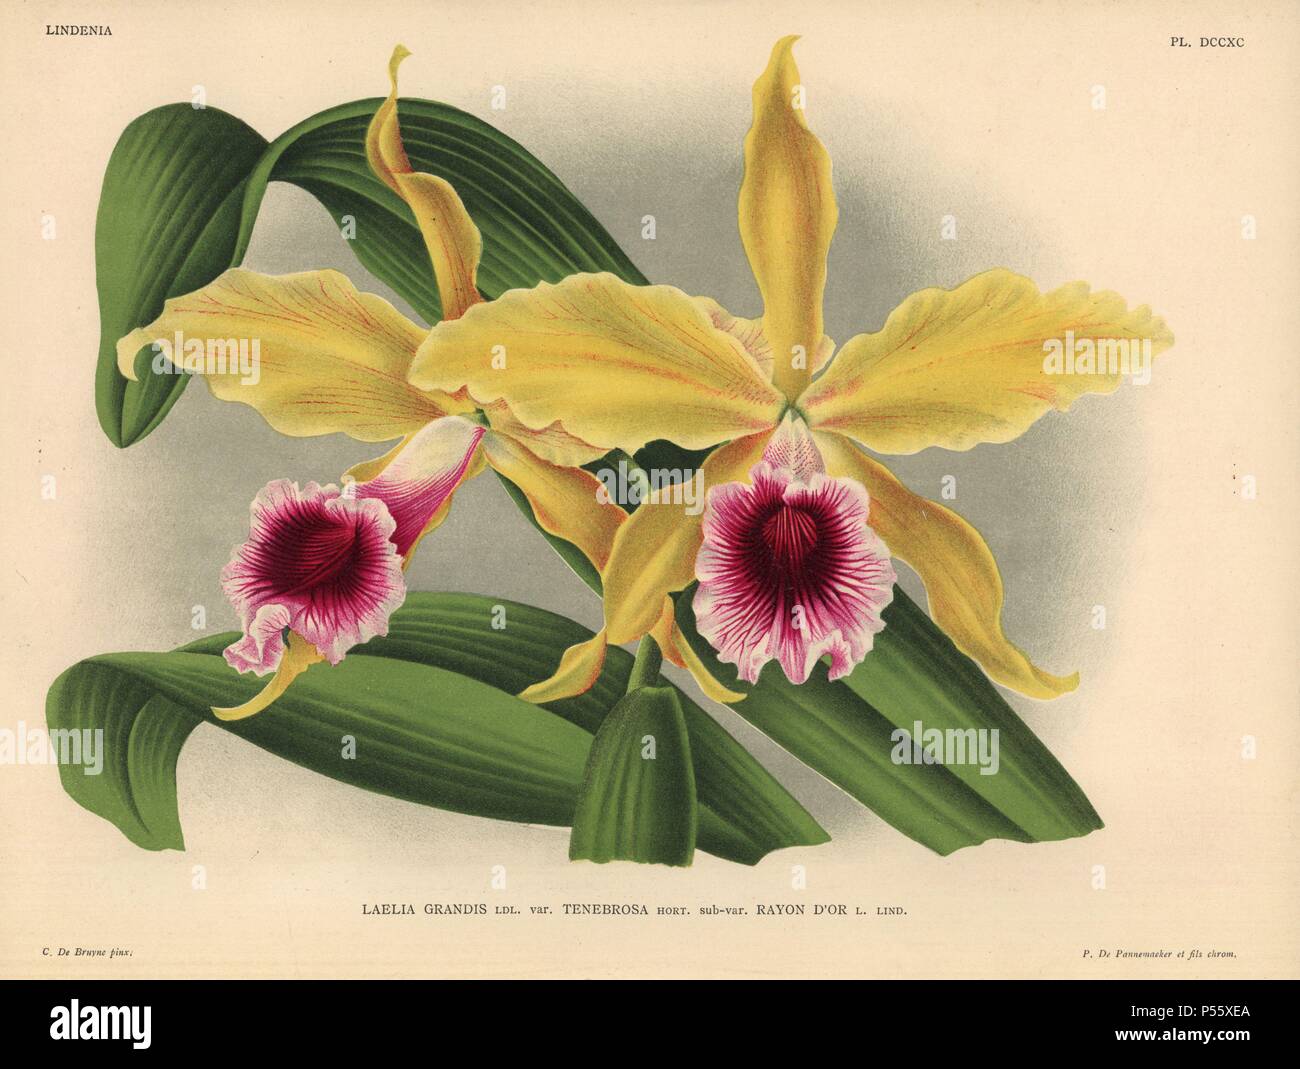 Rayon d'or sub-variety of Laelia grandis tenebrosa orchid. Illustration  drawn by C. de Bruyne and chromolithographed by P. de Pannemaeker et fils  from Lucien Linden's "Lindenia, Iconographie des Orchidees," Brussels, 1902  Stock